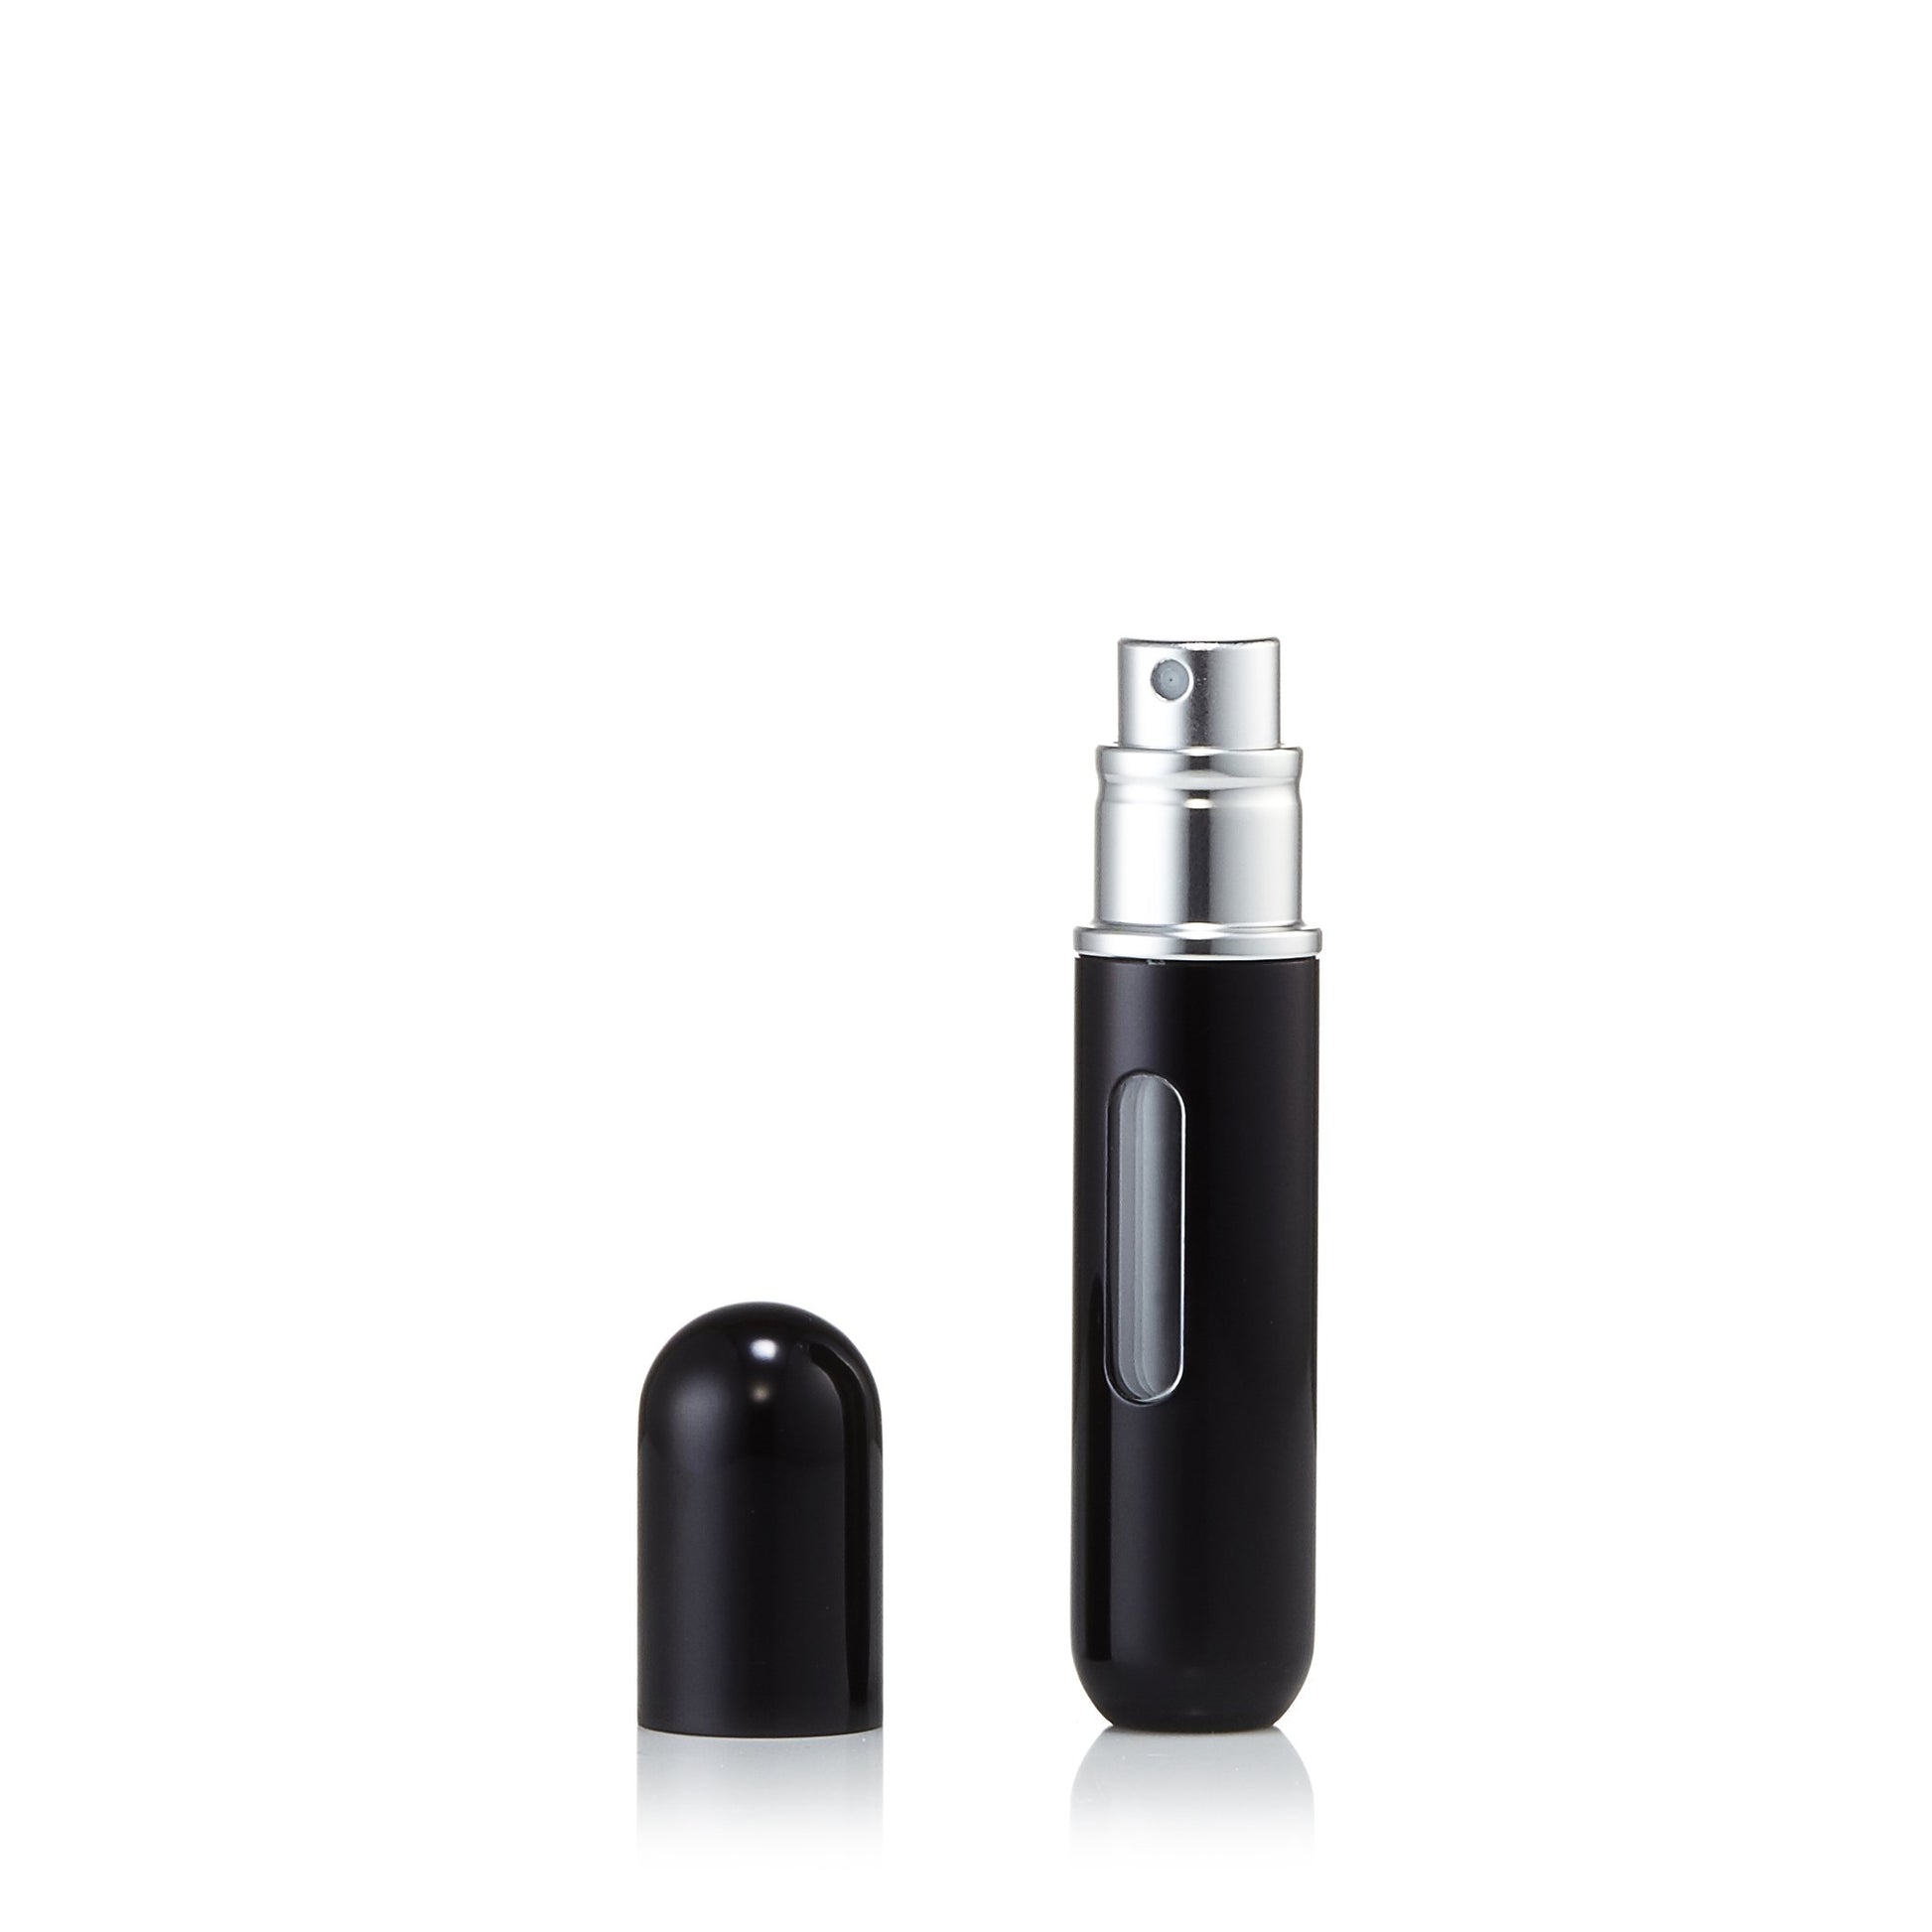 Pump and Fill Fragrance Atomizer by Flo Click to open in modal